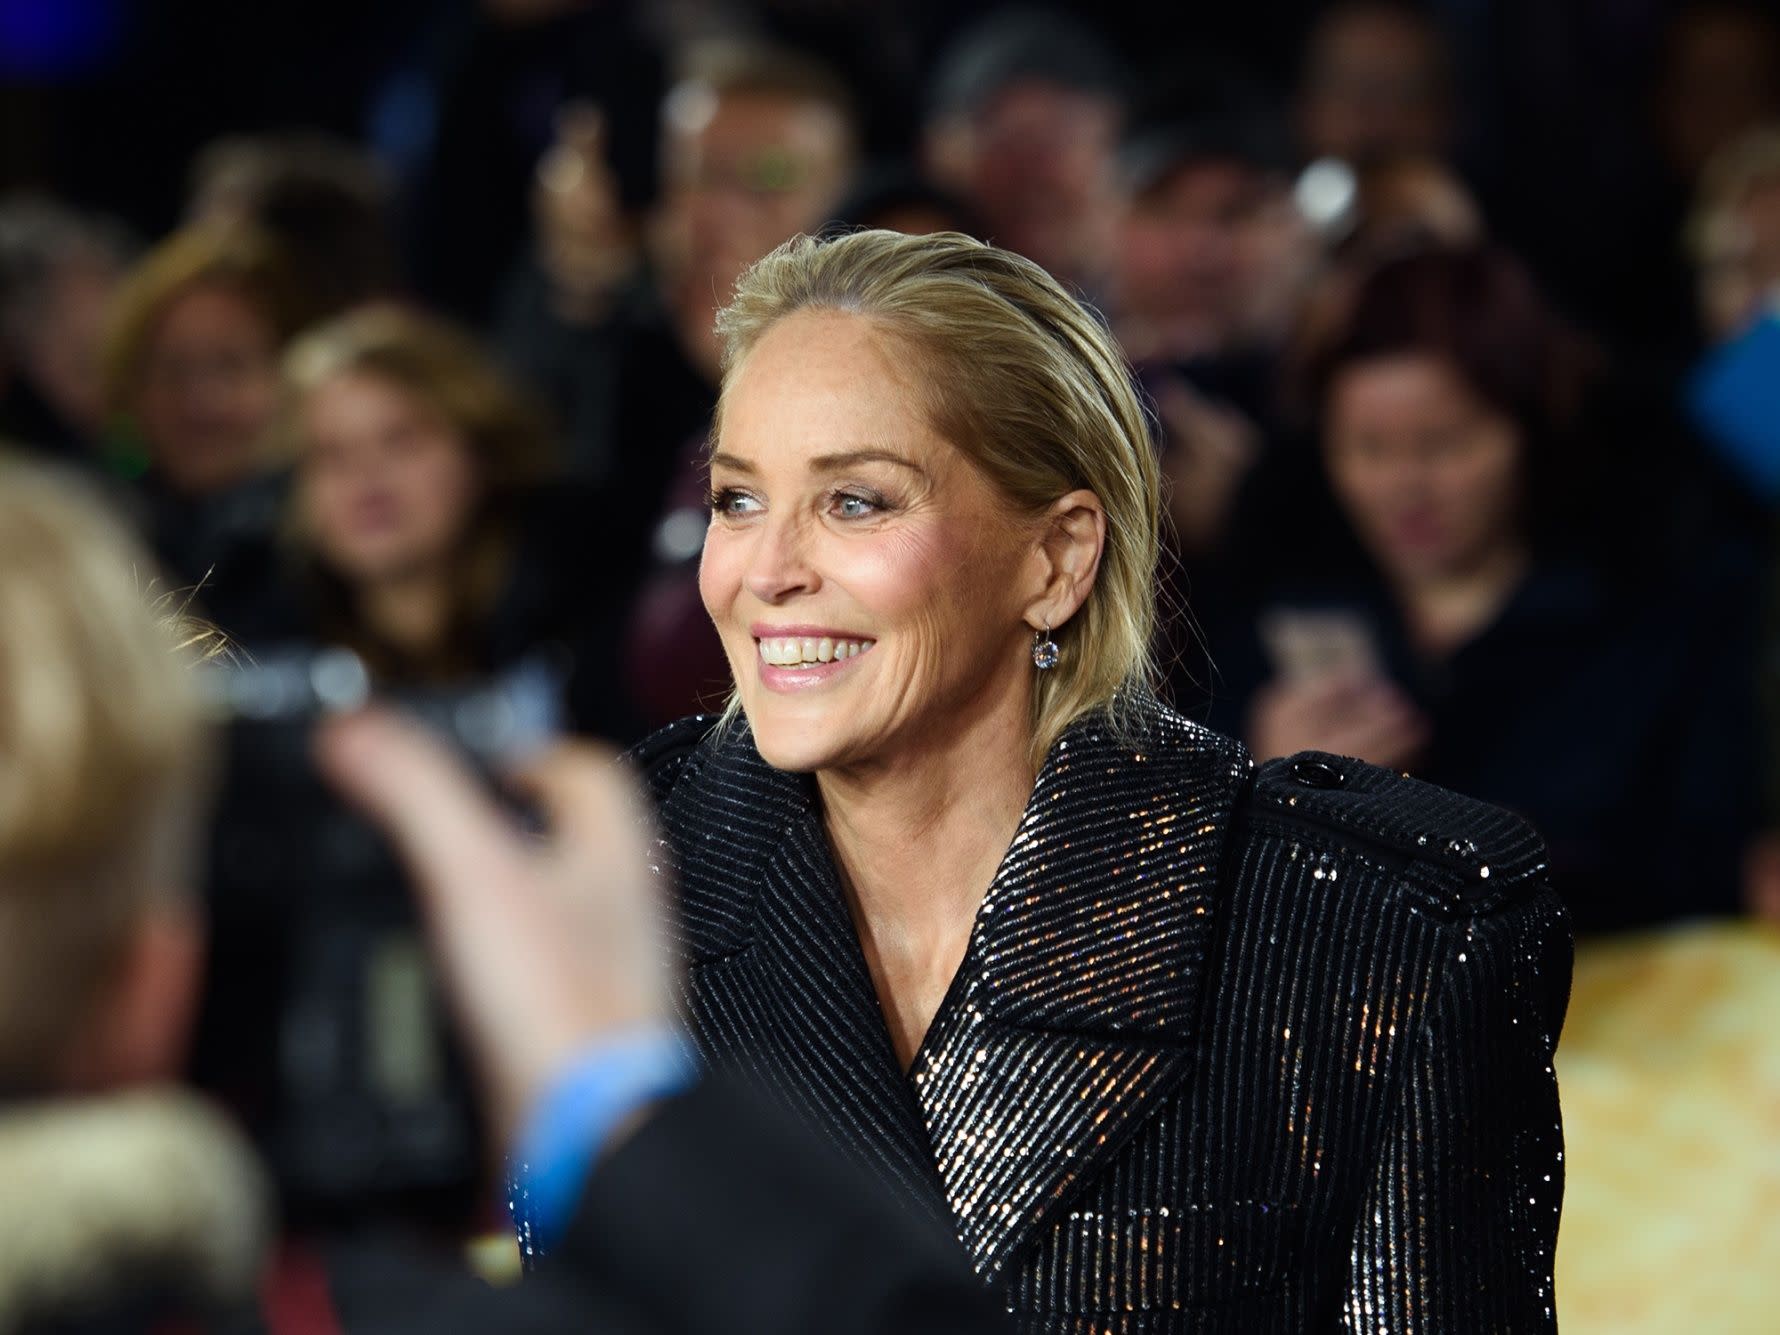 Sharon Stone Is Back on Bumble After ‘Fake Profile’ Blunder